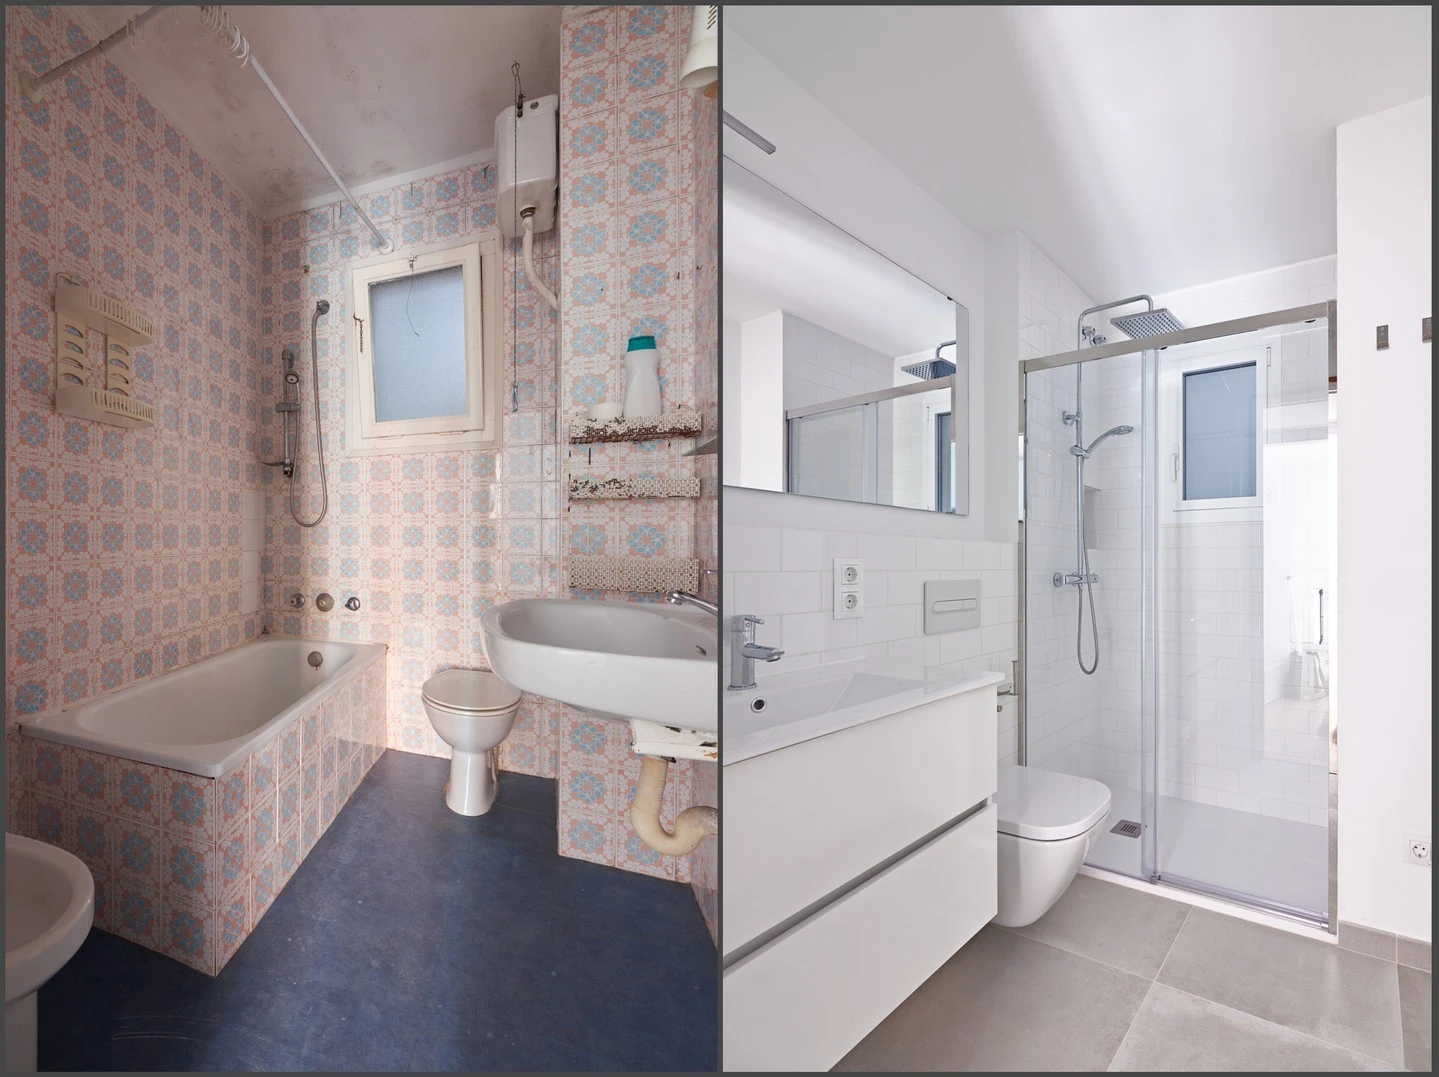 A bathroom before and after it has been renovated with new white wall tiles and grey floor tiles.